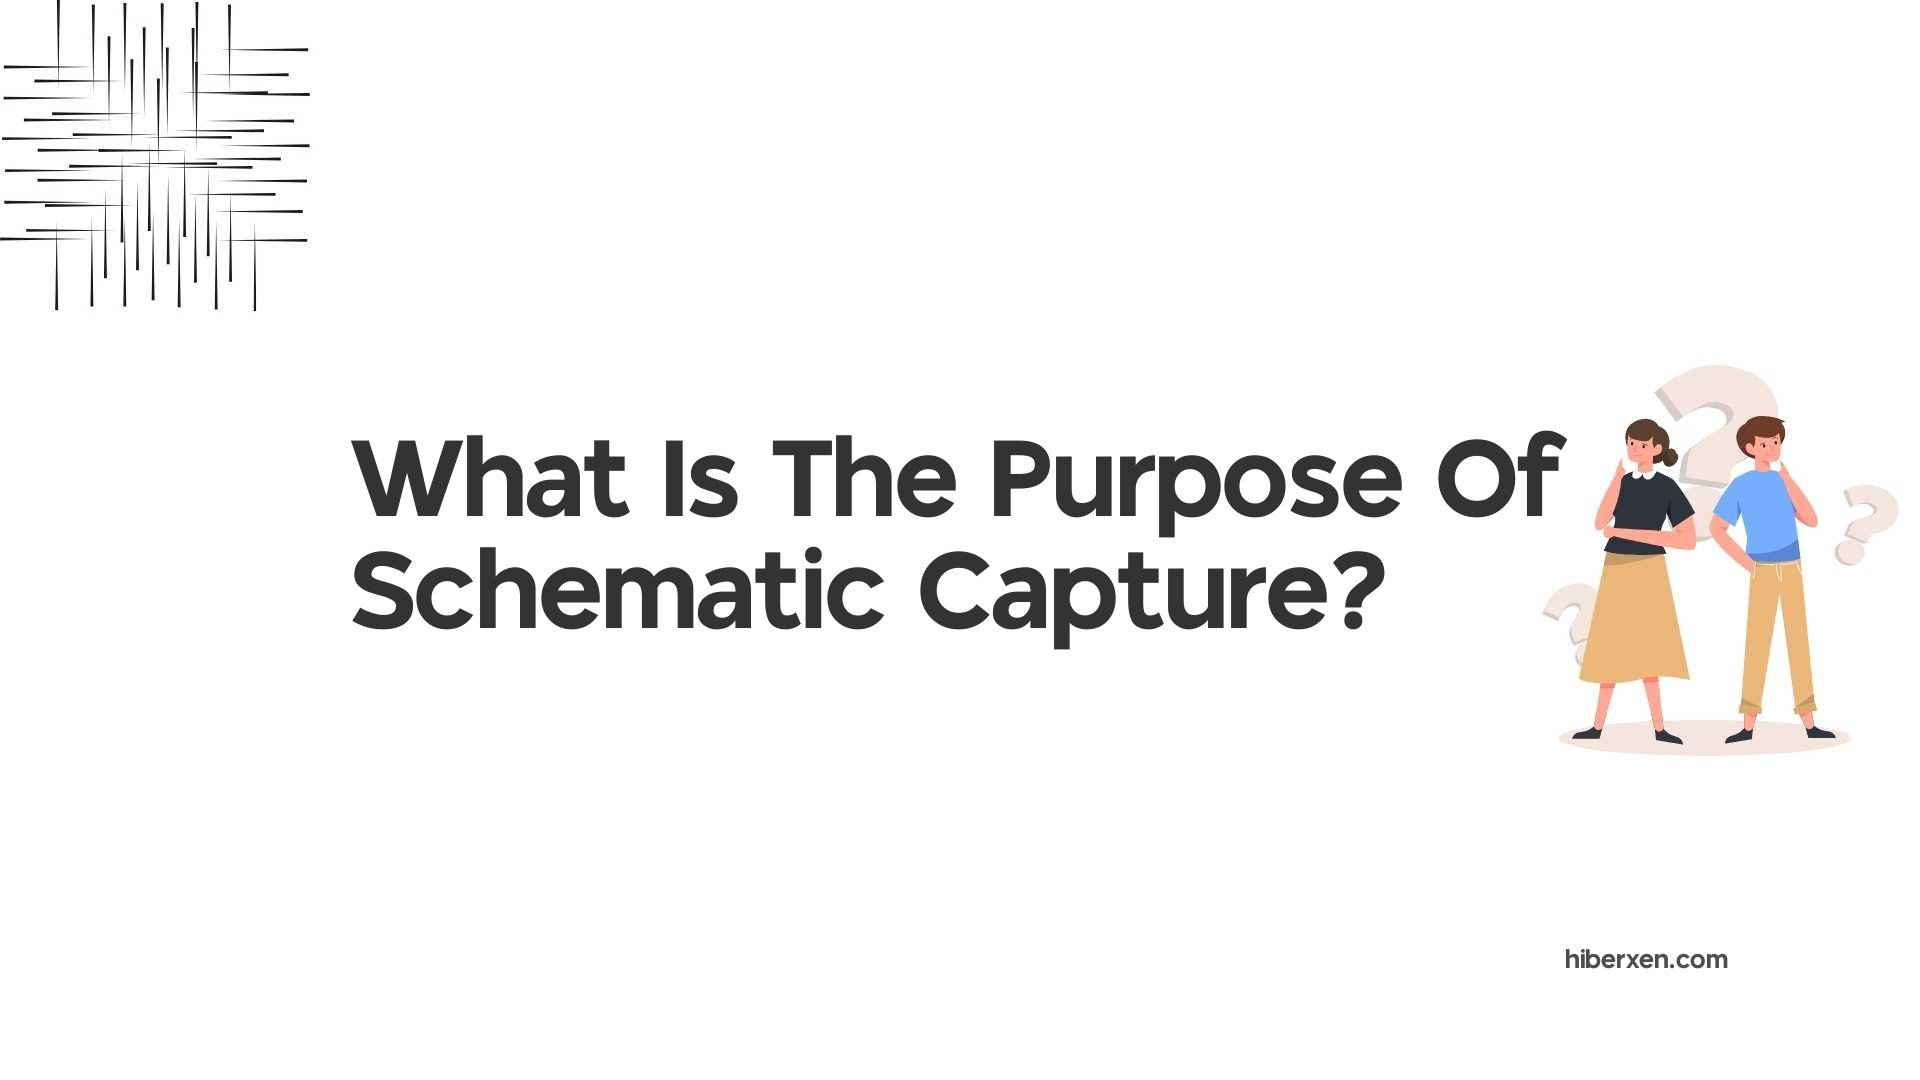 What Is The Purpose Of Schematic Capture?